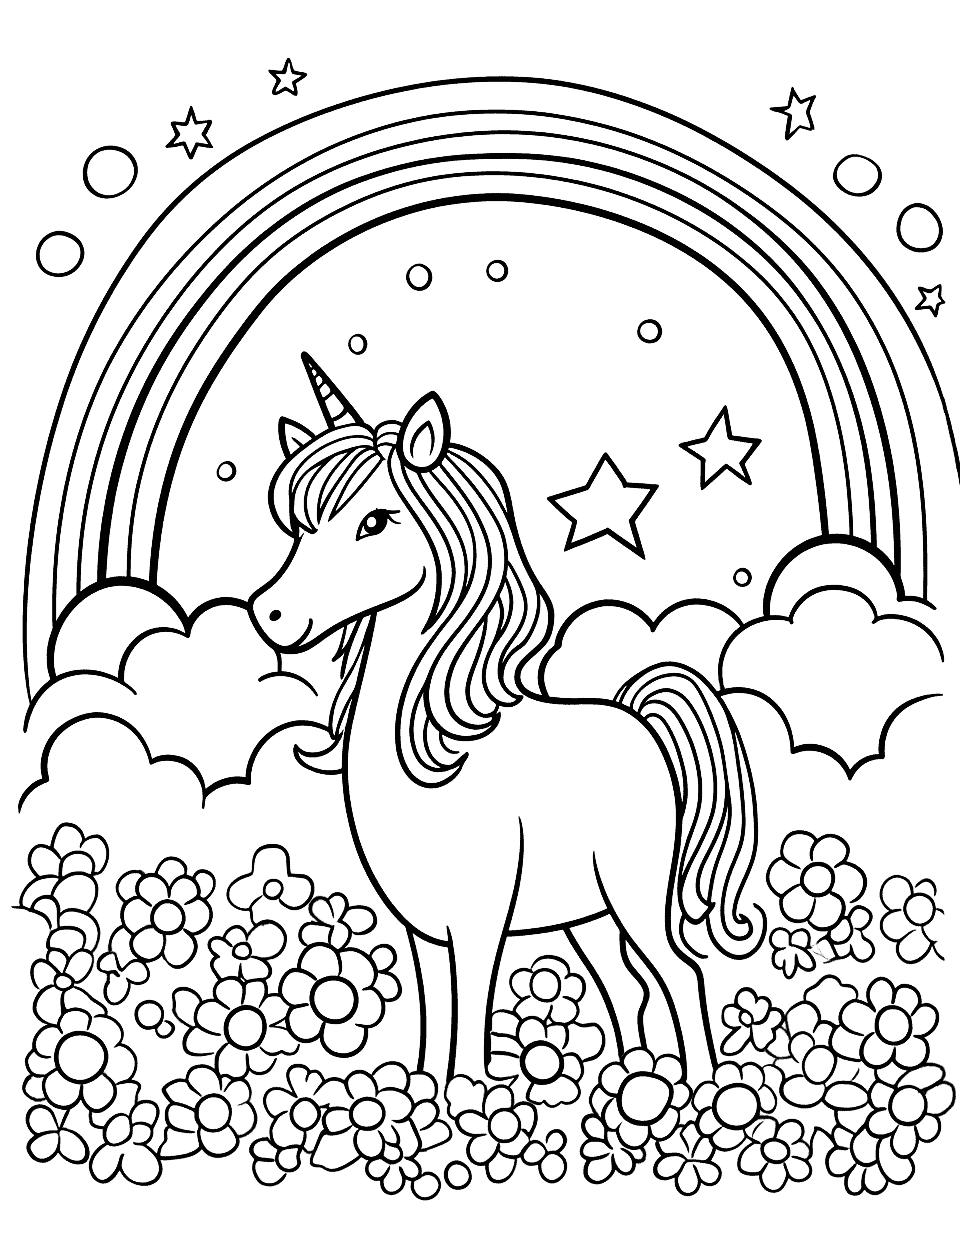 Unicorn Under the Rainbow Coloring Page - A cute, simple-to-color unicorn standing majestically under a big, bright rainbow.